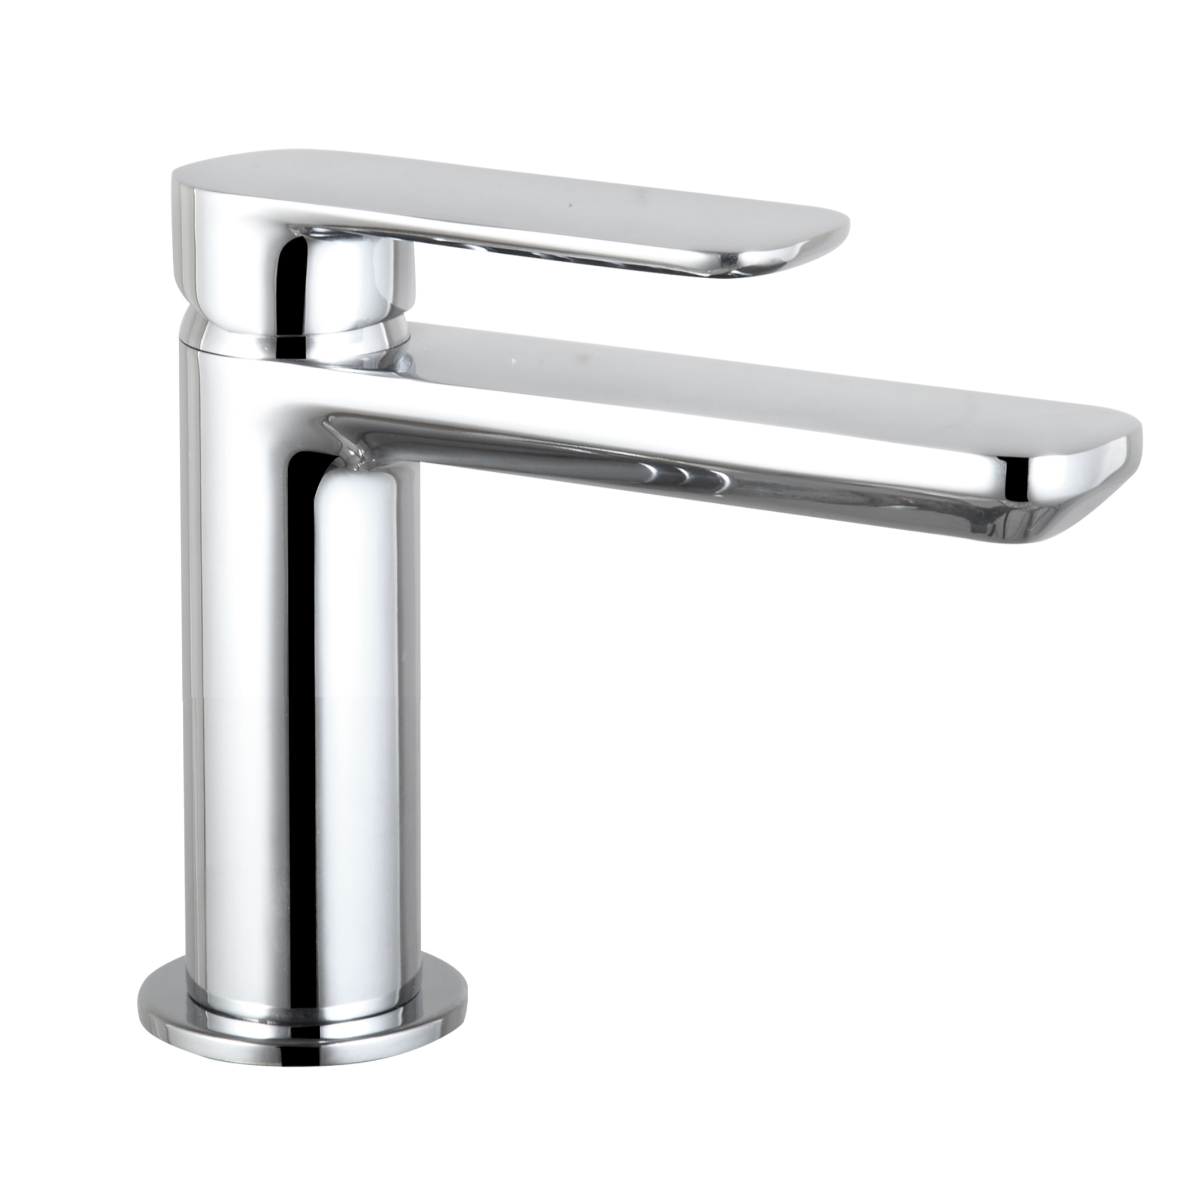 Rona Chrome Cloakroom Basin Mixer Tap And Click Waste